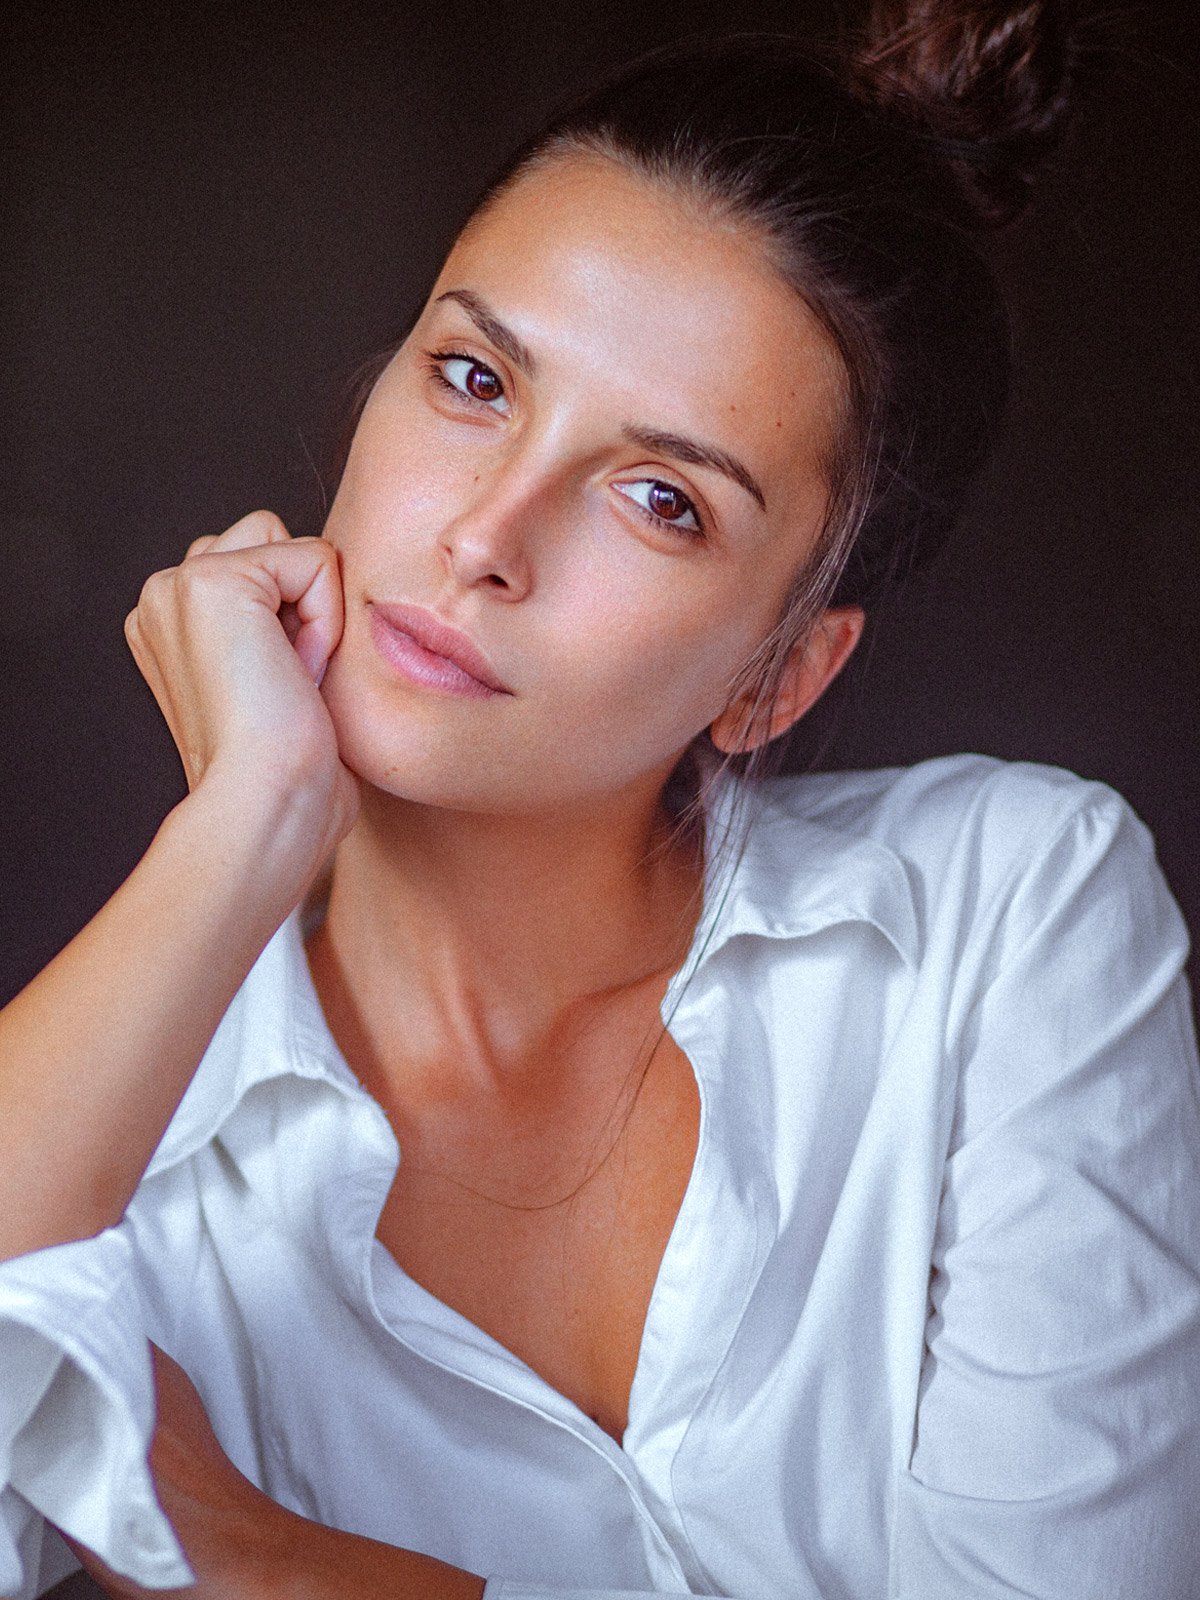 boston juvederm patient model in a white button up shirt resting her head on her hand